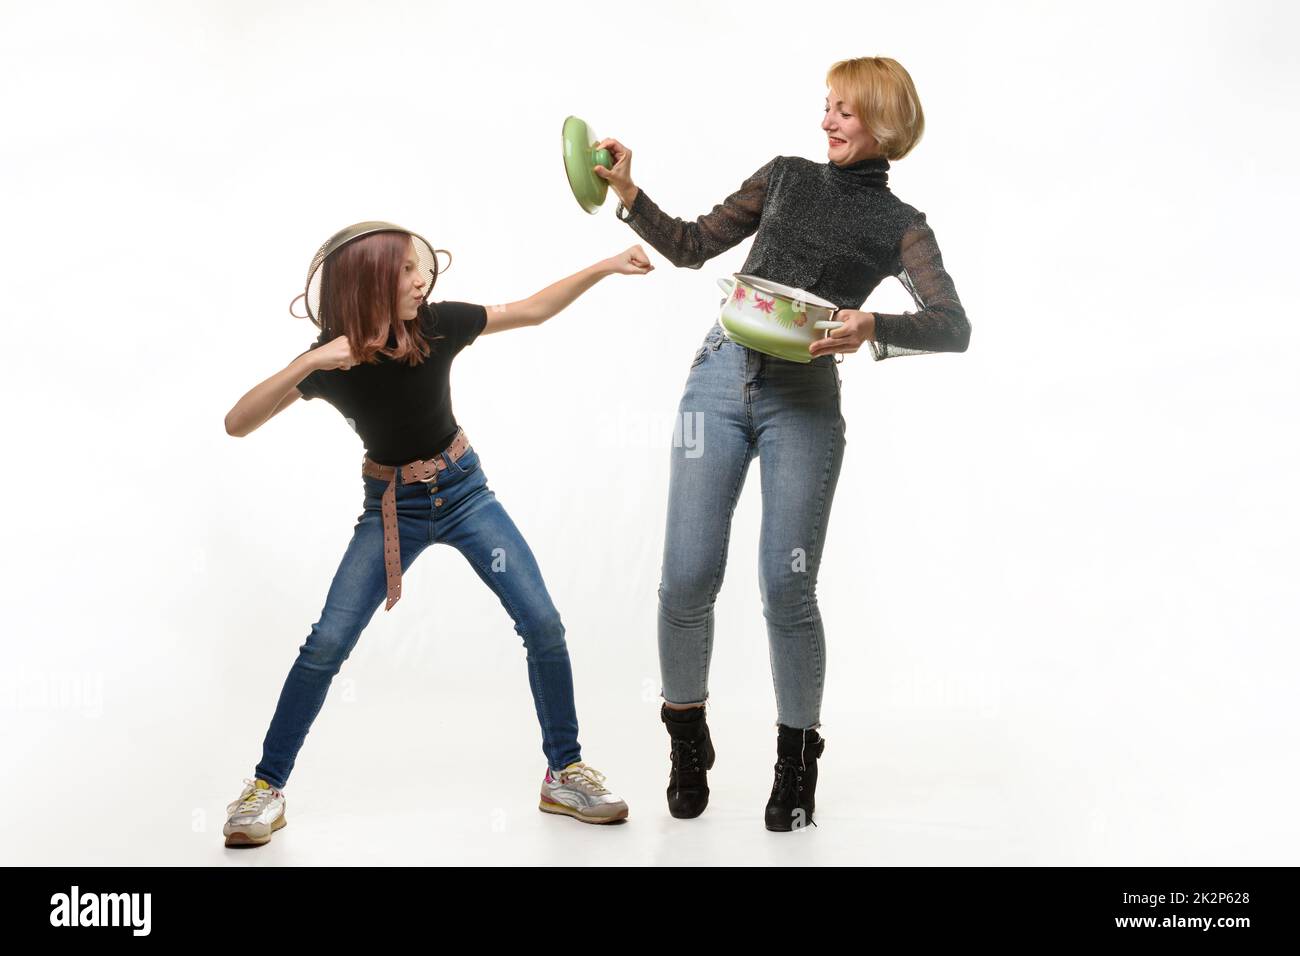 Mom and daughter have fun using kitchen utensils, the girl attacks, mom defends herself with a pot lid Stock Photo